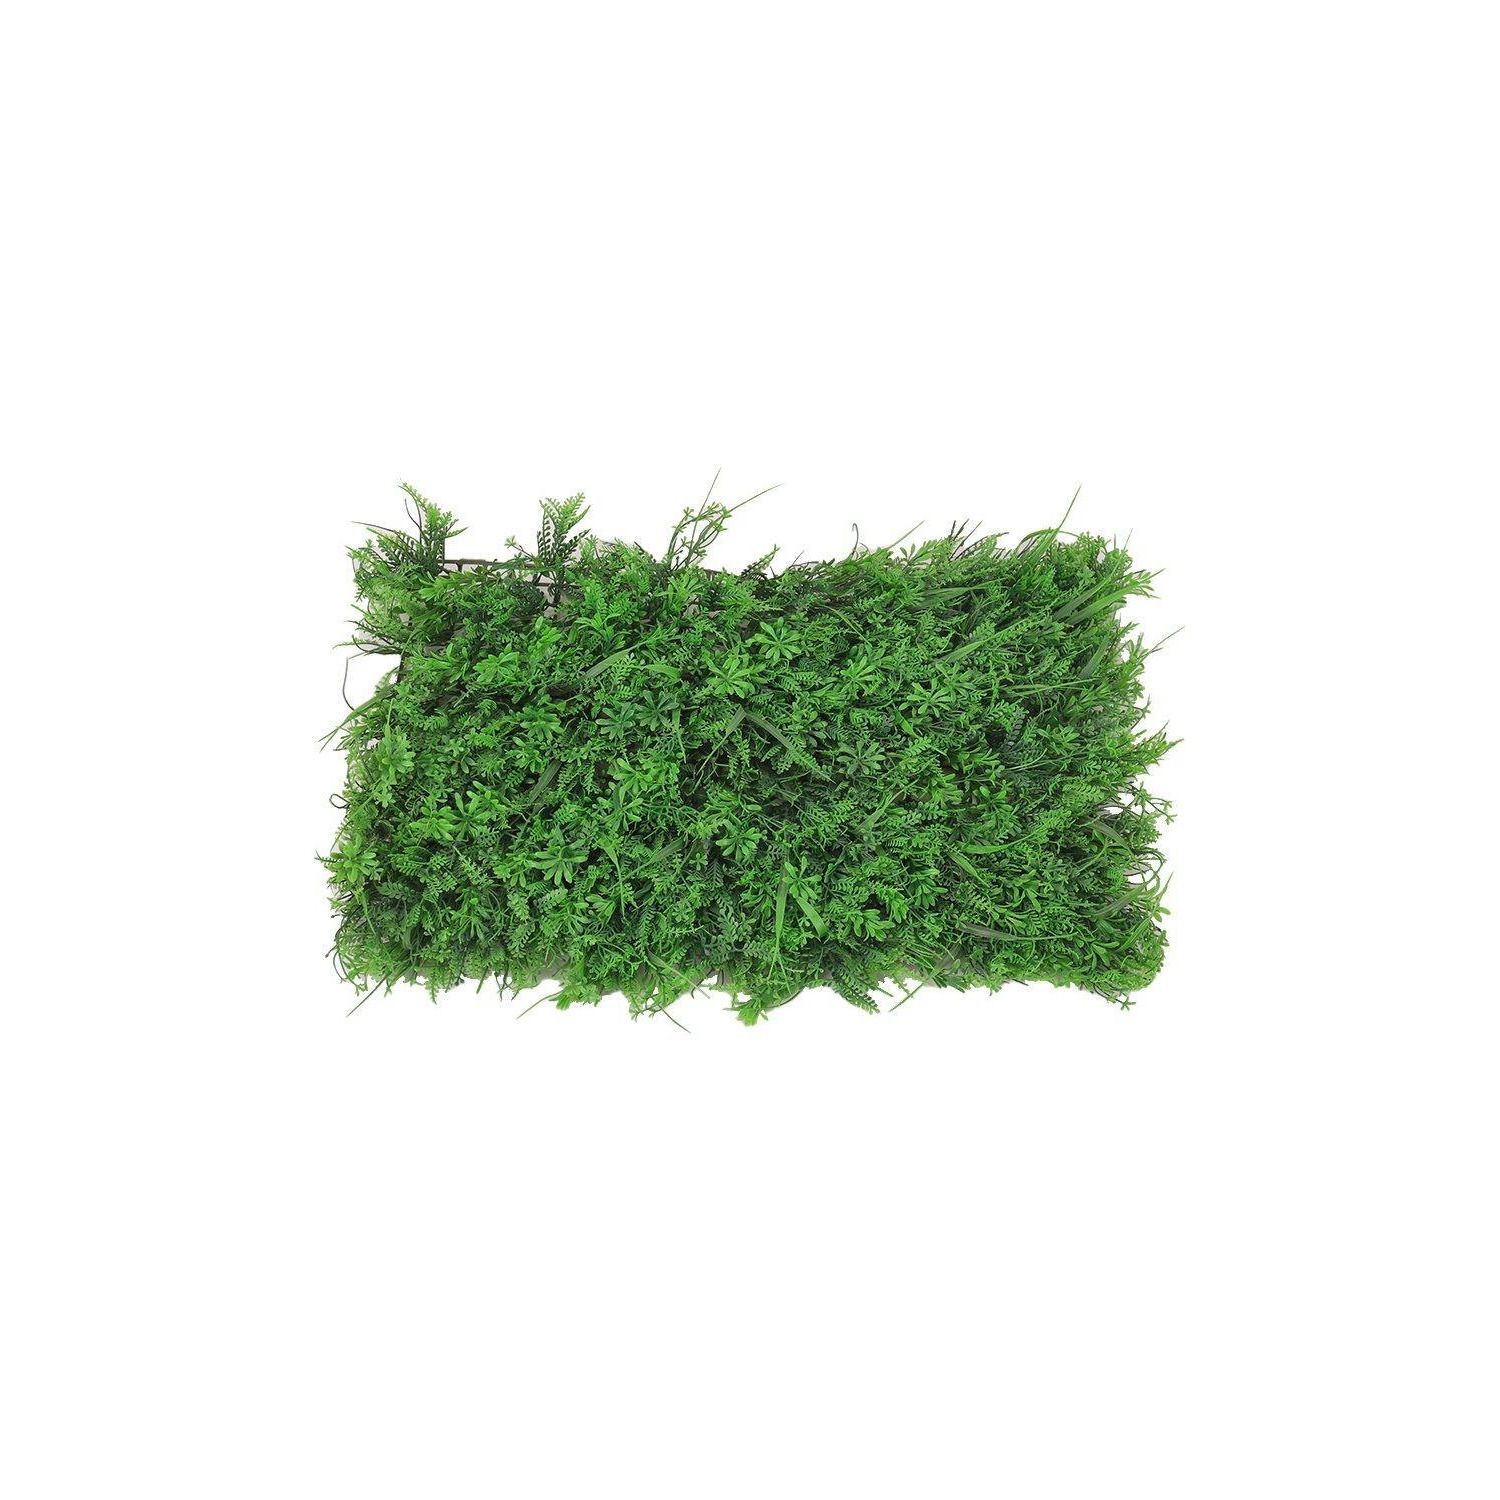 Artificial Plant Wall Panel Greenery Hedge - image 1